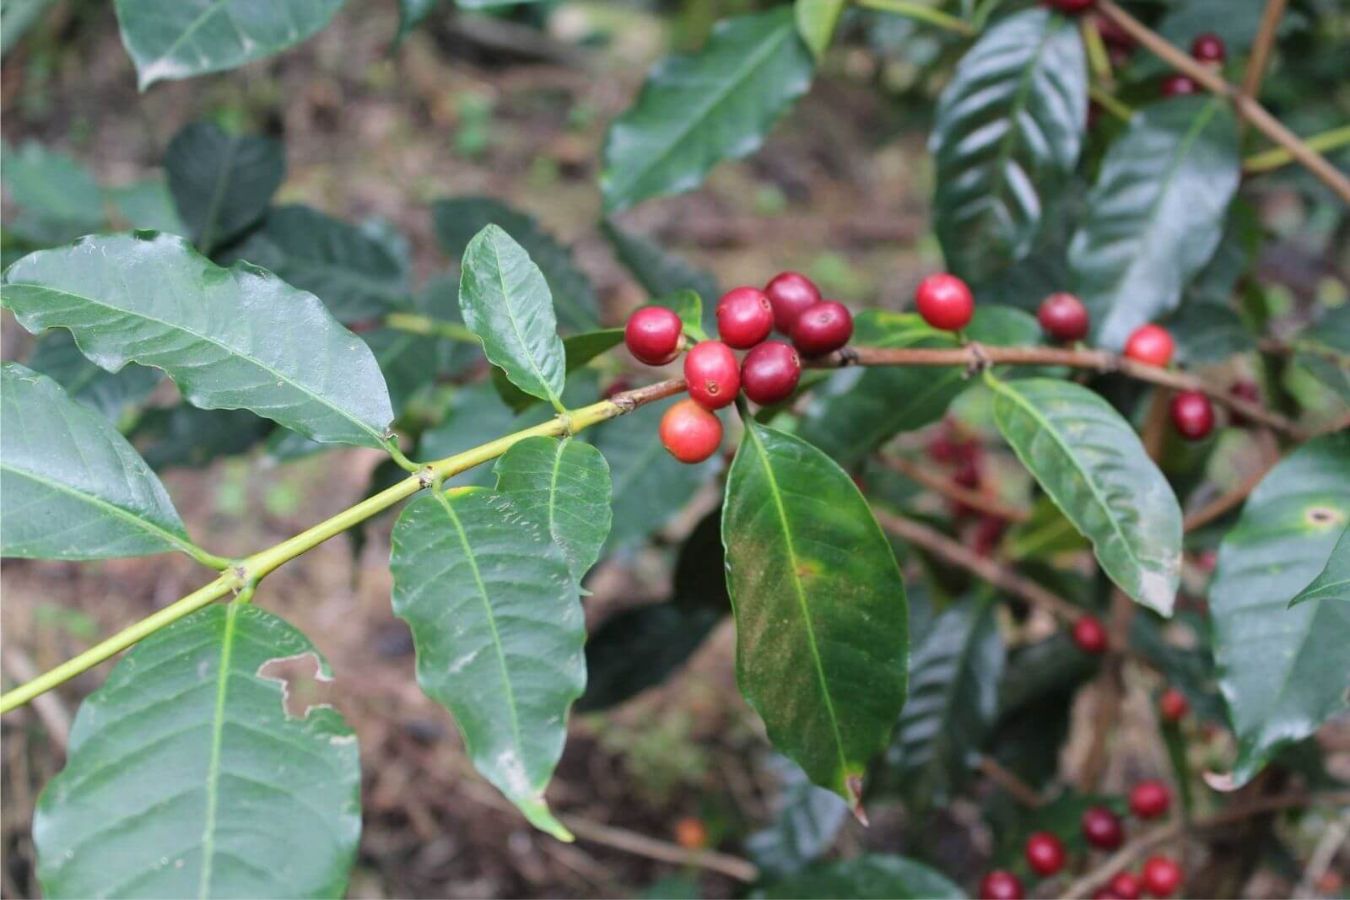 History of Typica and Bourbon